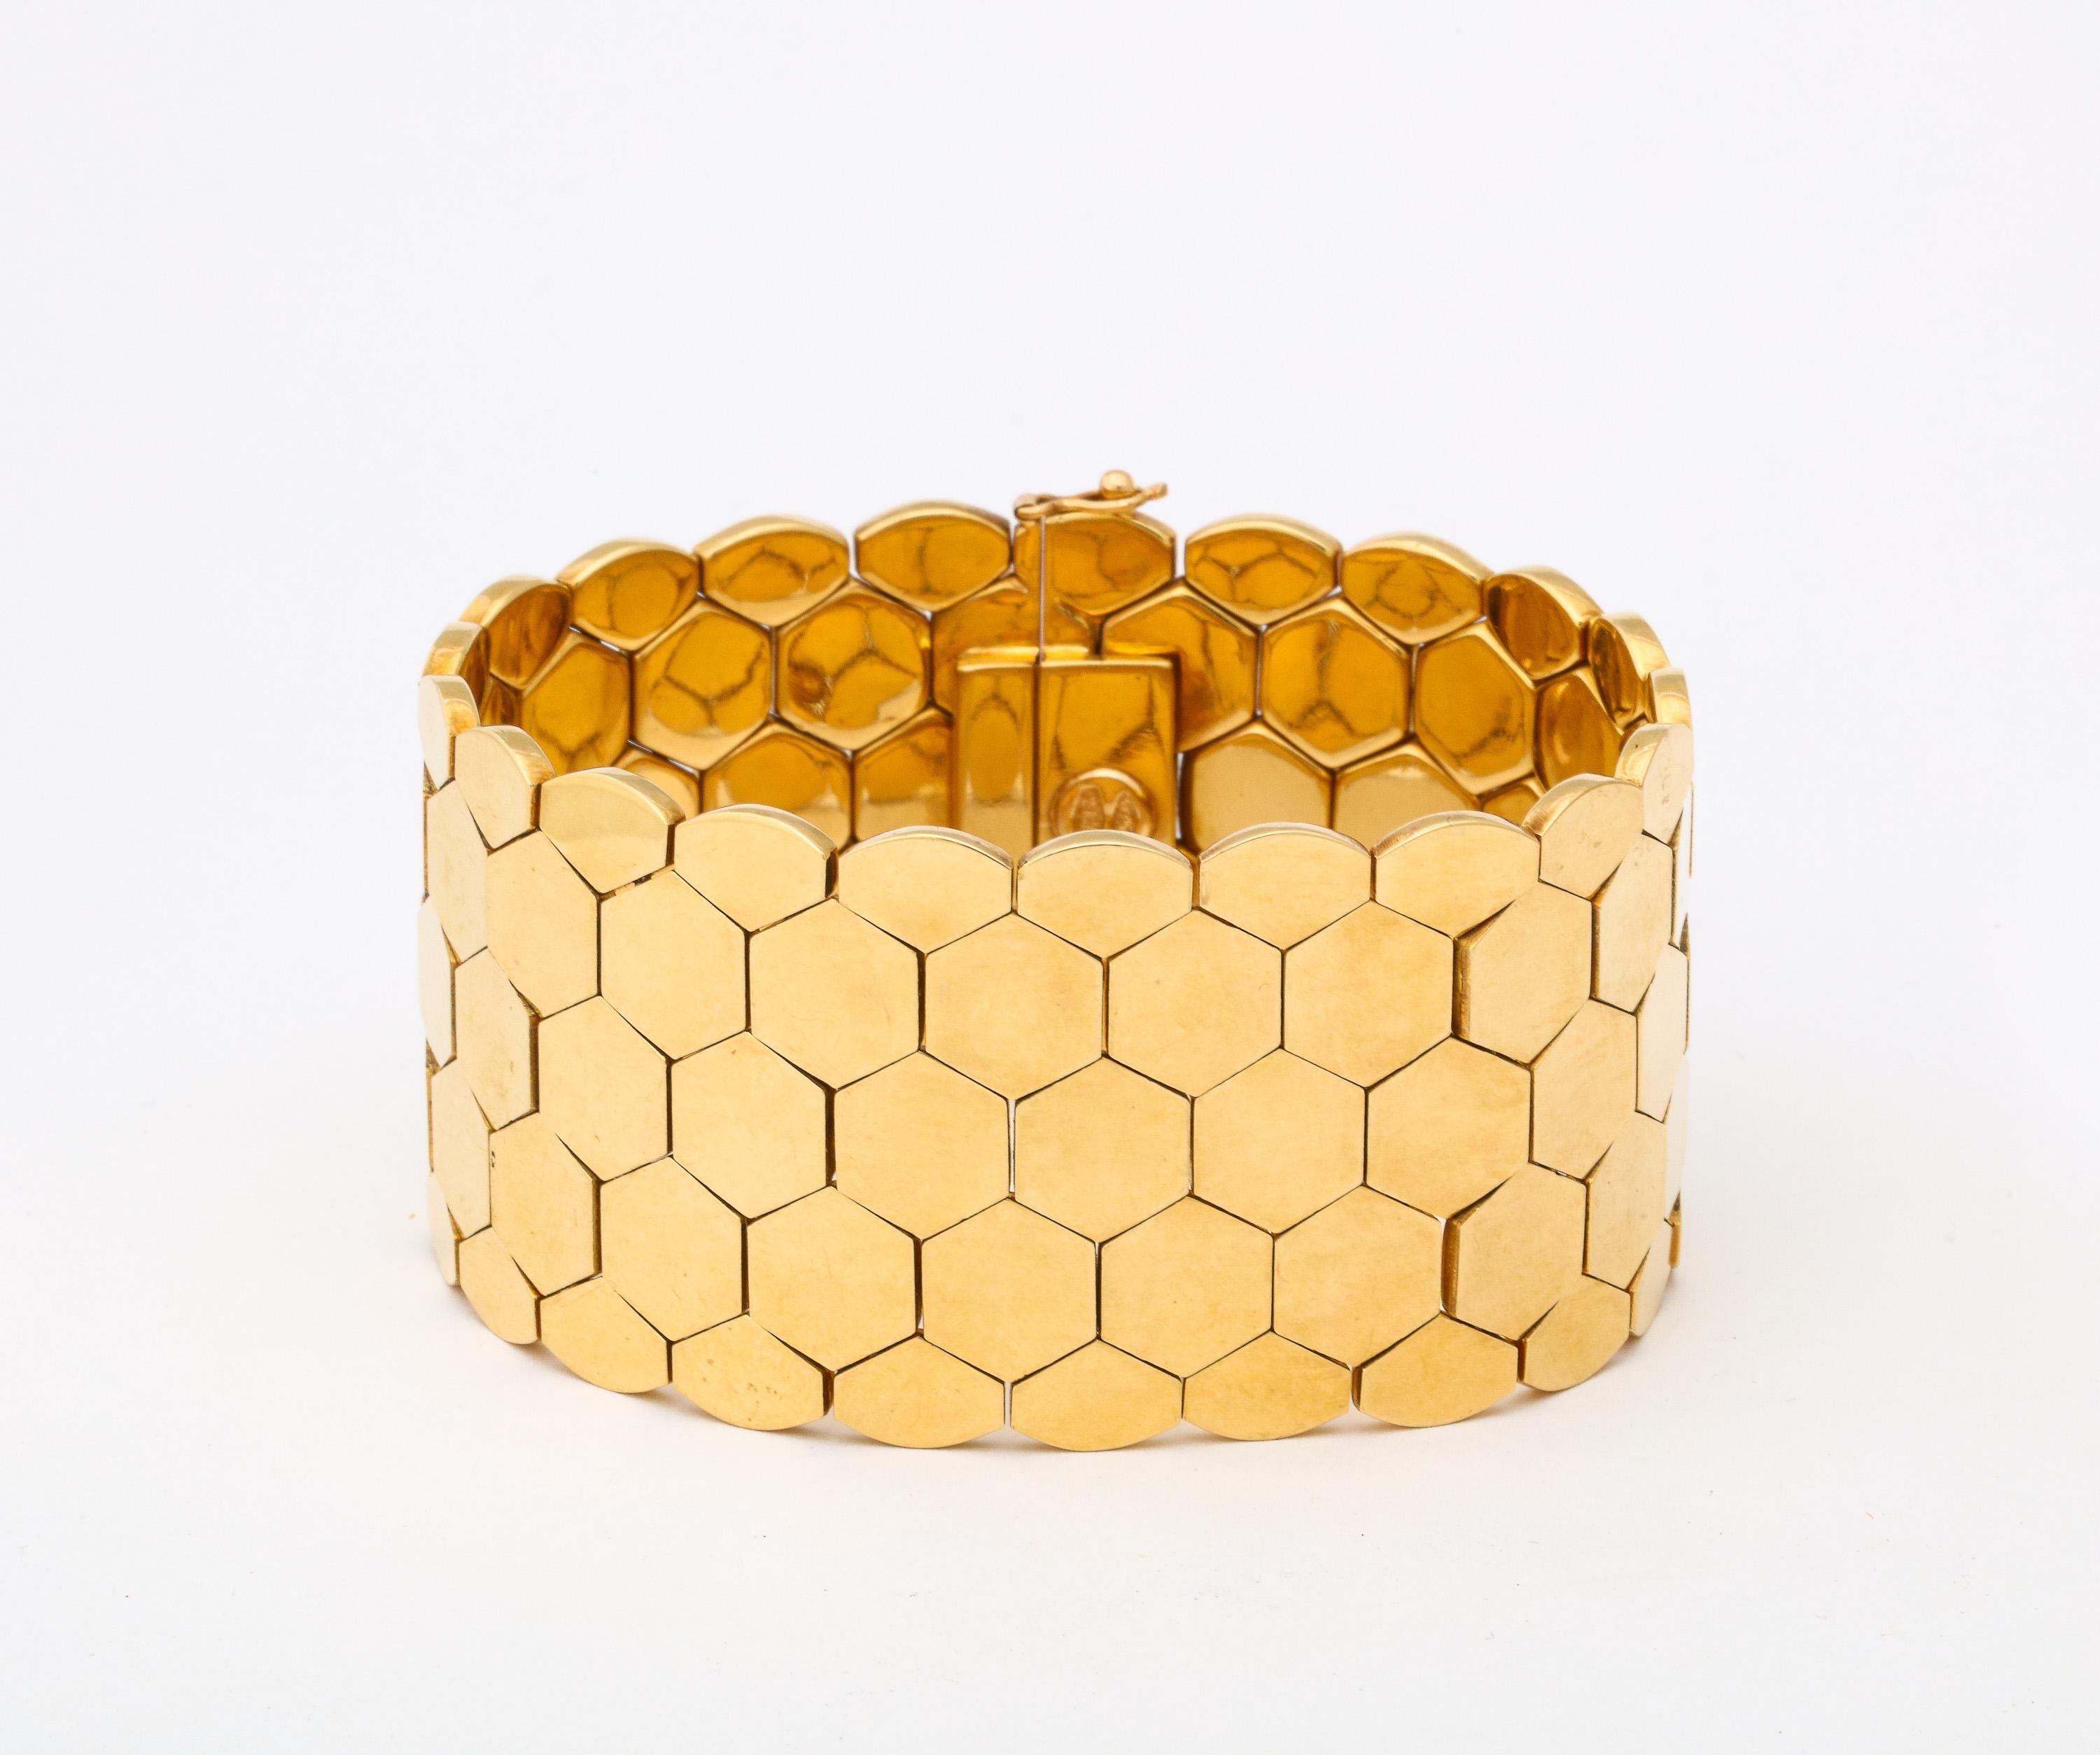 Sleek and ultra chic 18kt RoseGold Honeycomb Bracelet with figure 8 safety..  Bearing Italian control mark AL (Alessandria) and 750 for 18kt.
What a way to keep track of your wrist!  The eye will follow its glistening surface and you know that the